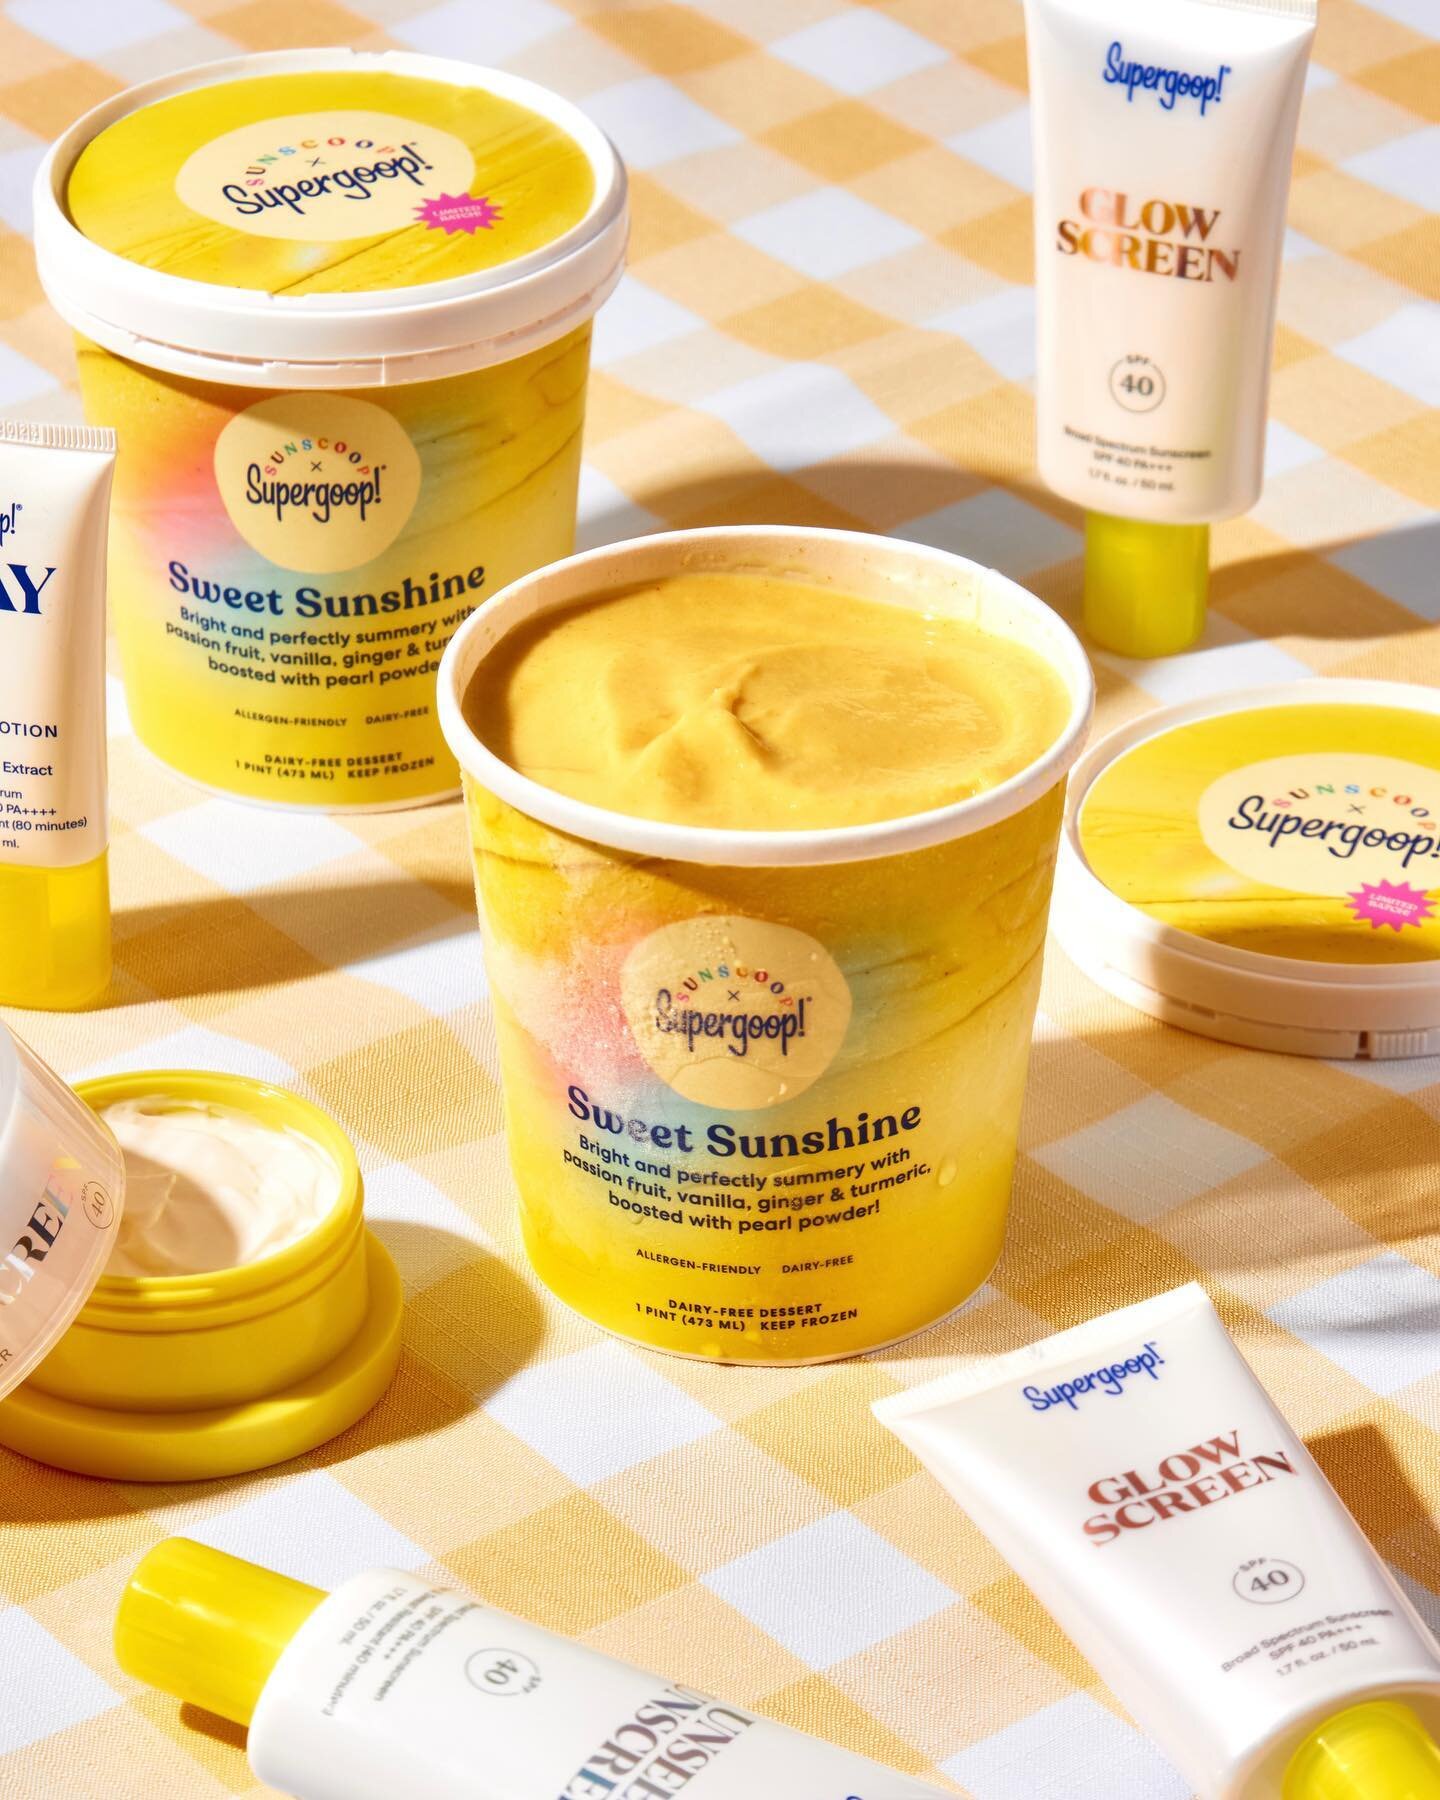 &quot;Cult-favorite SPF skincare brand Supergoop! created an ice cream that will help you savor the summer season. In collaboration with plant-based, allergen-friendly ice cream brand Sunscoop, and inspired by Supergoop!'s bestselling Glowscreen SPF,